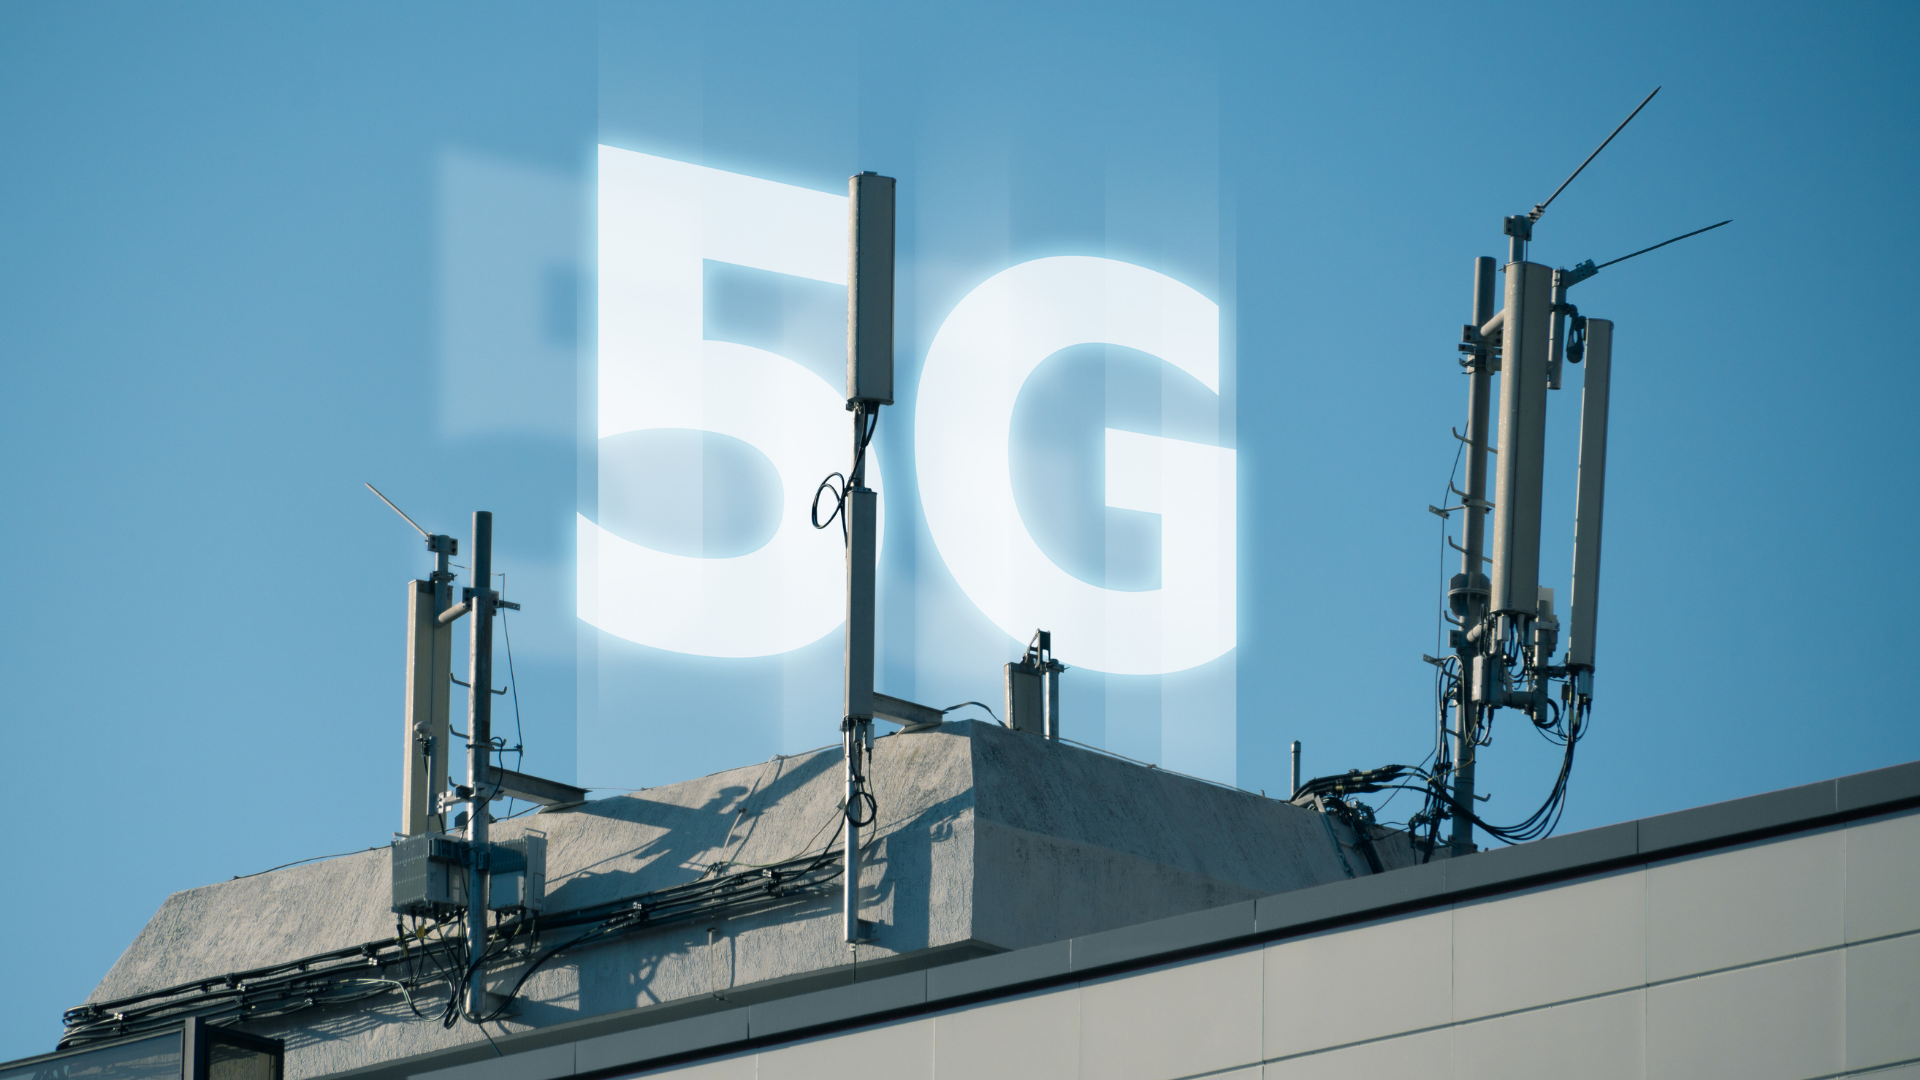 5G antennas on the rooftop with digital 5G sign